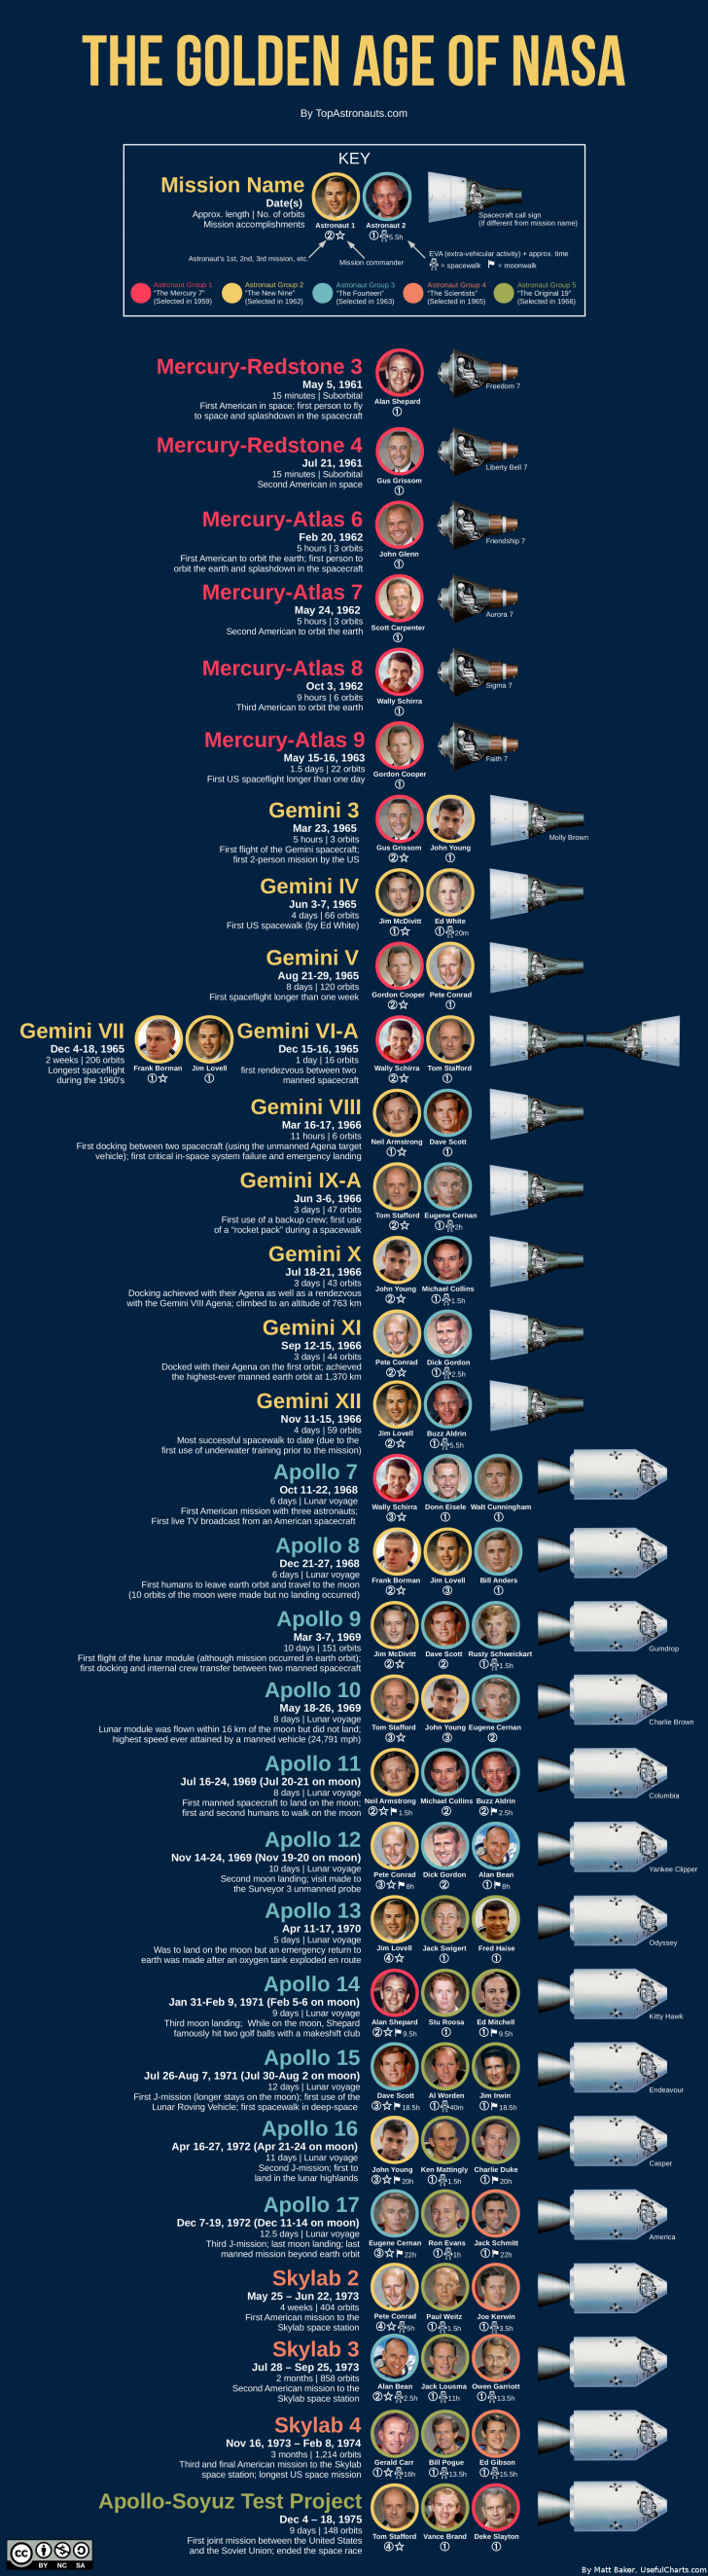 NASA Golden Age of Space Travel